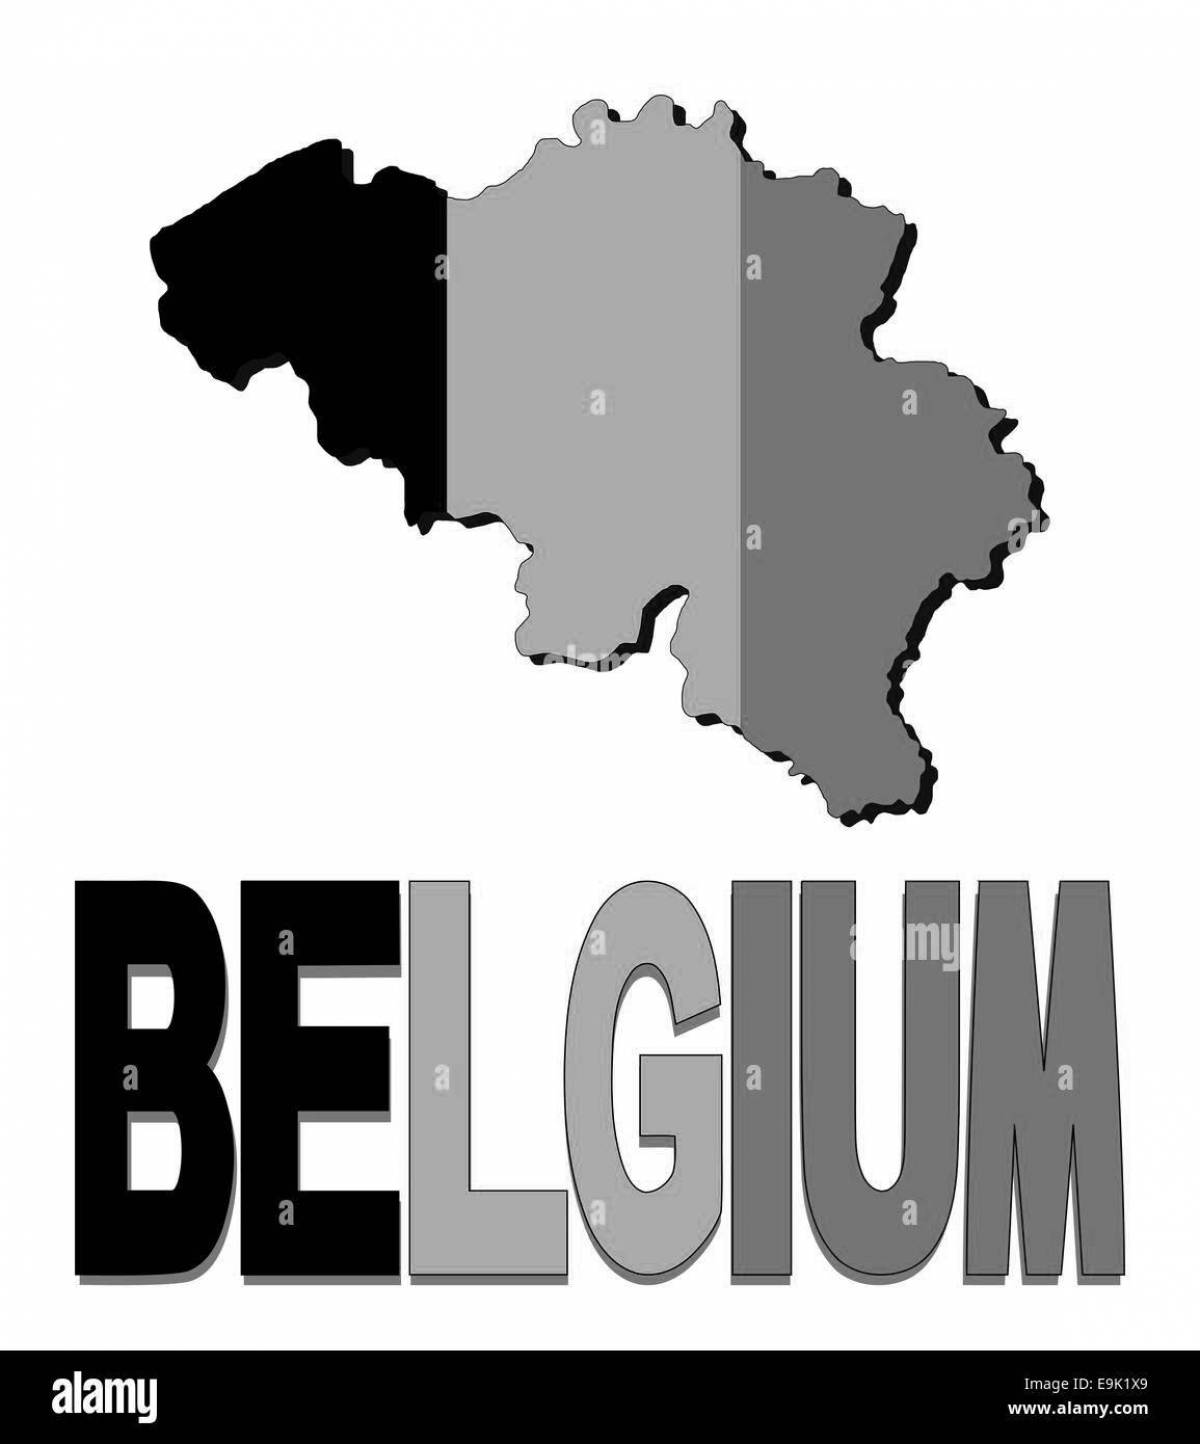 Belgian flag funny coloring page